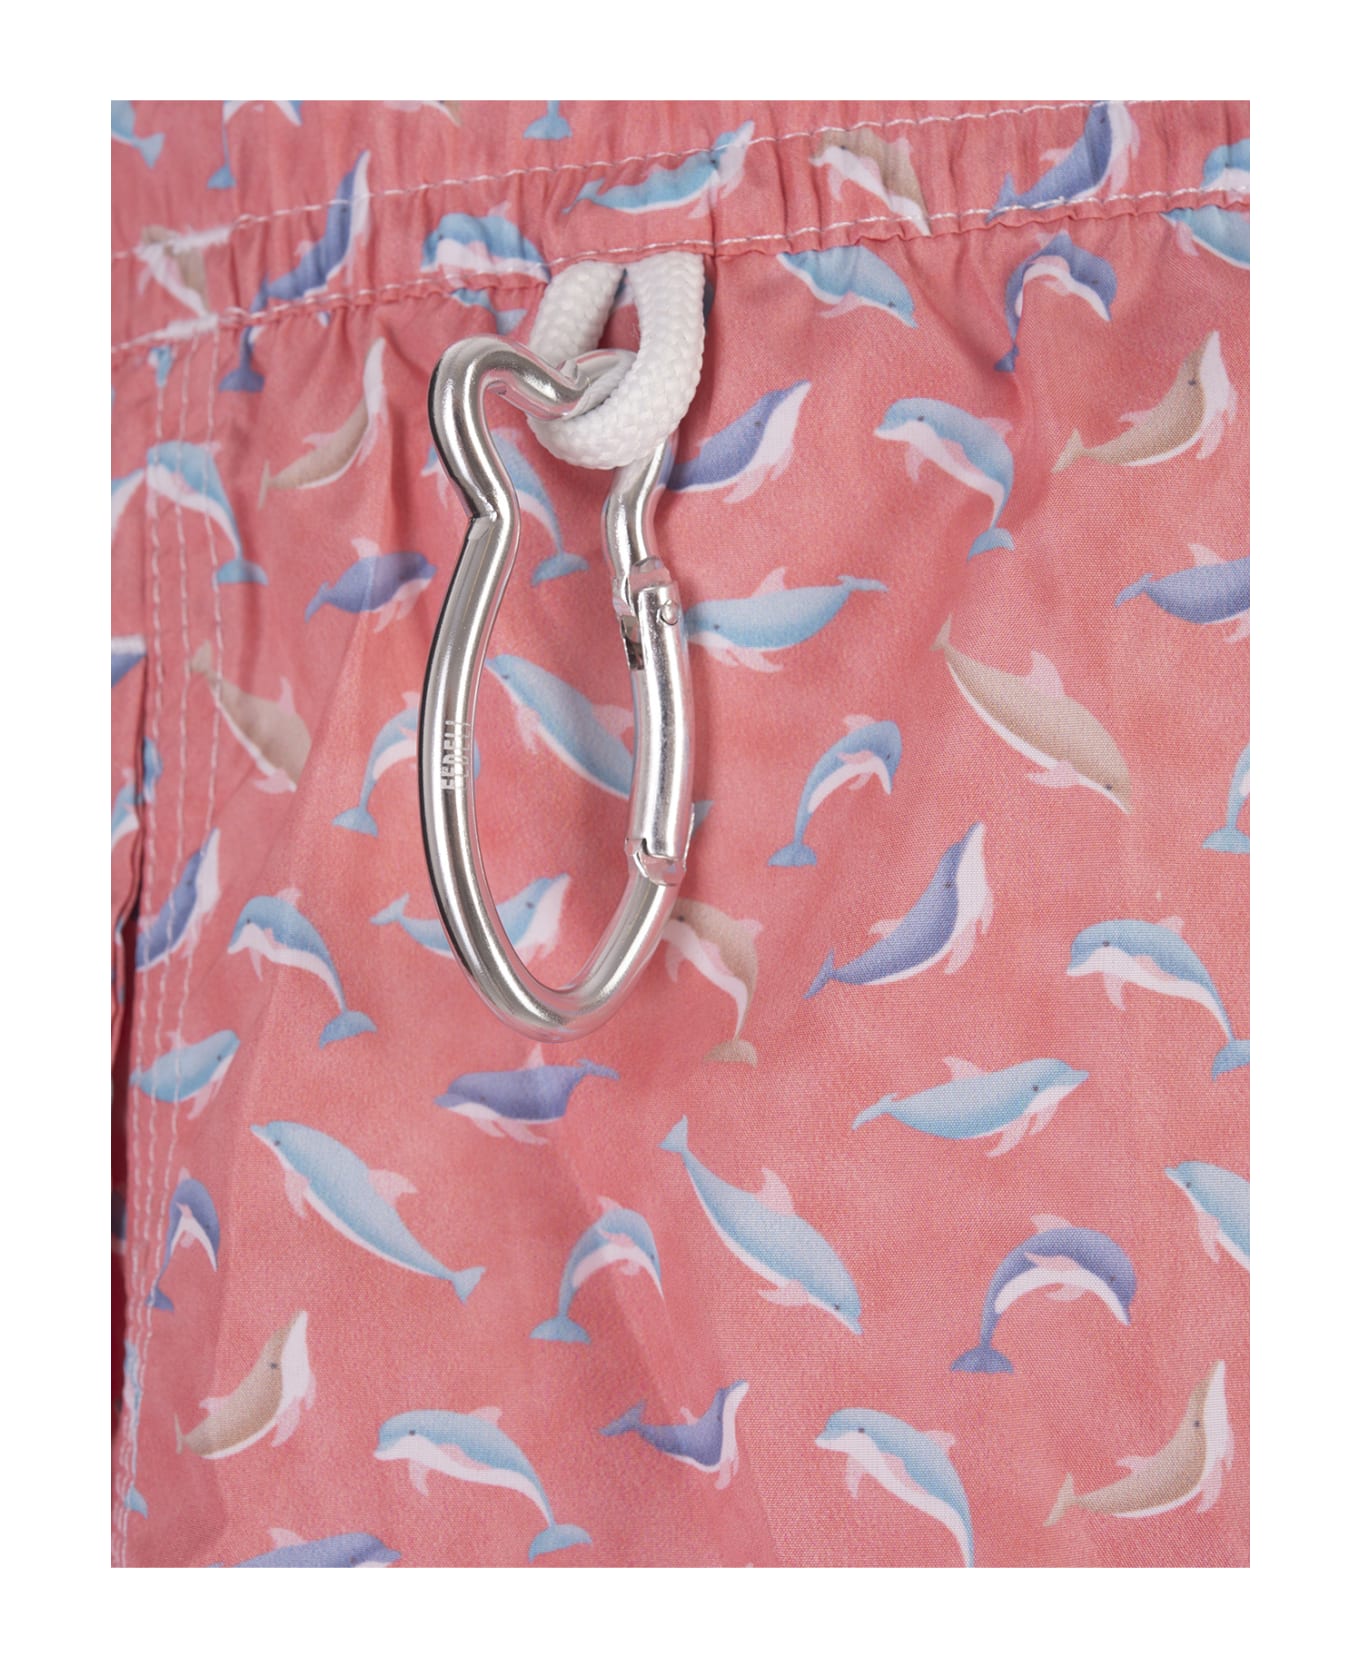 Fedeli Red Swim Shorts With Blue Dolphin Pattern - Red